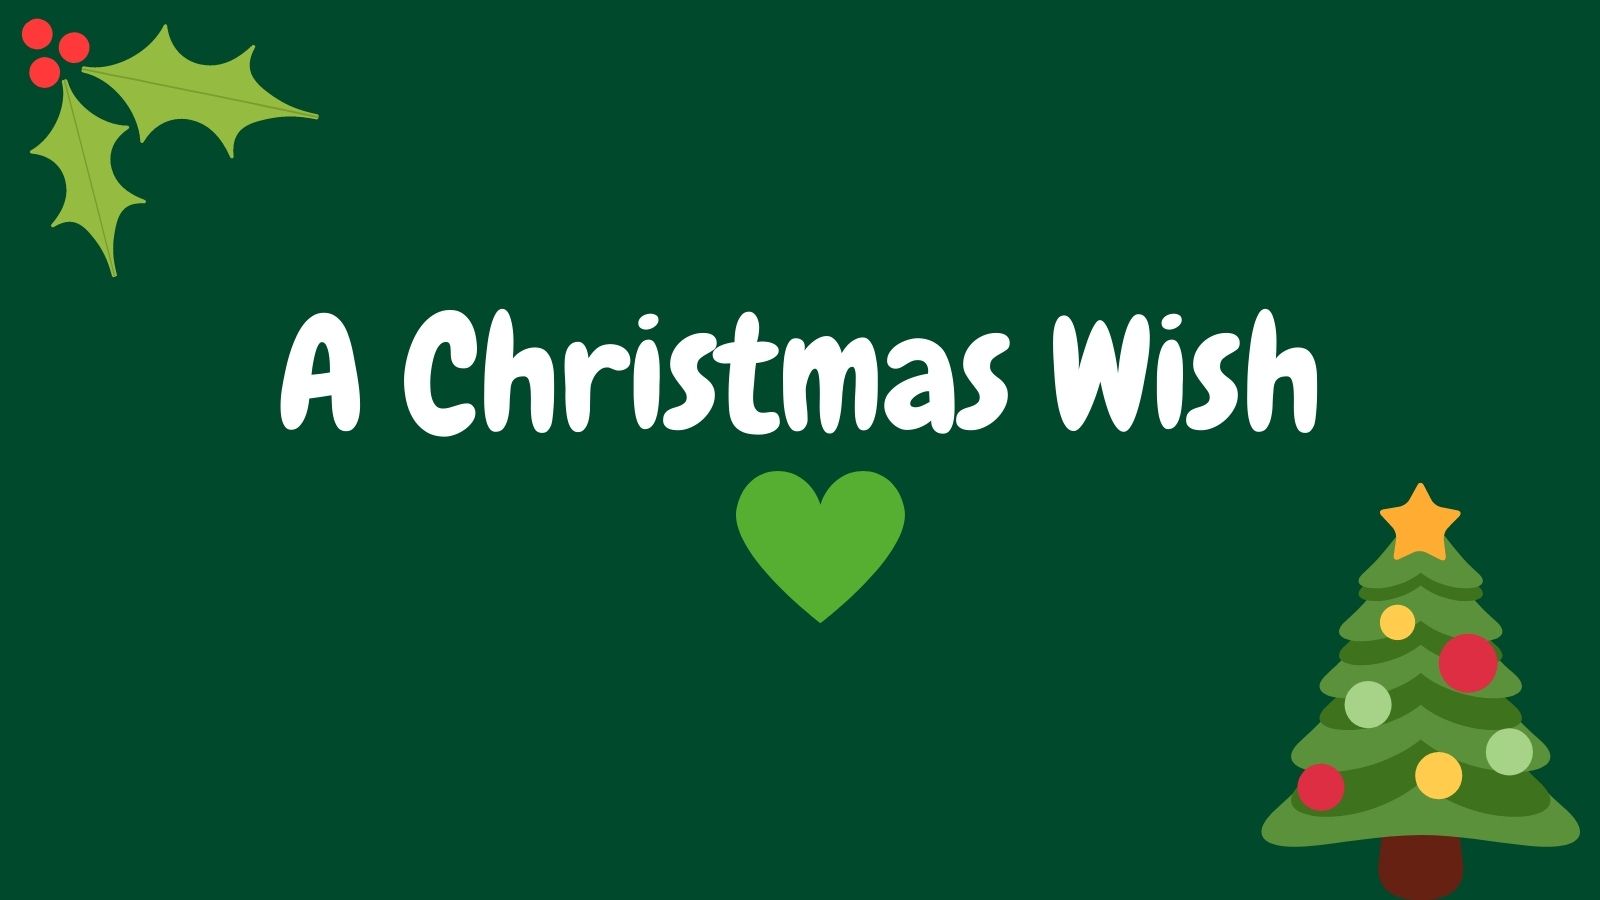 A Christmas wish campaign image with holy and Christmas tree graphics